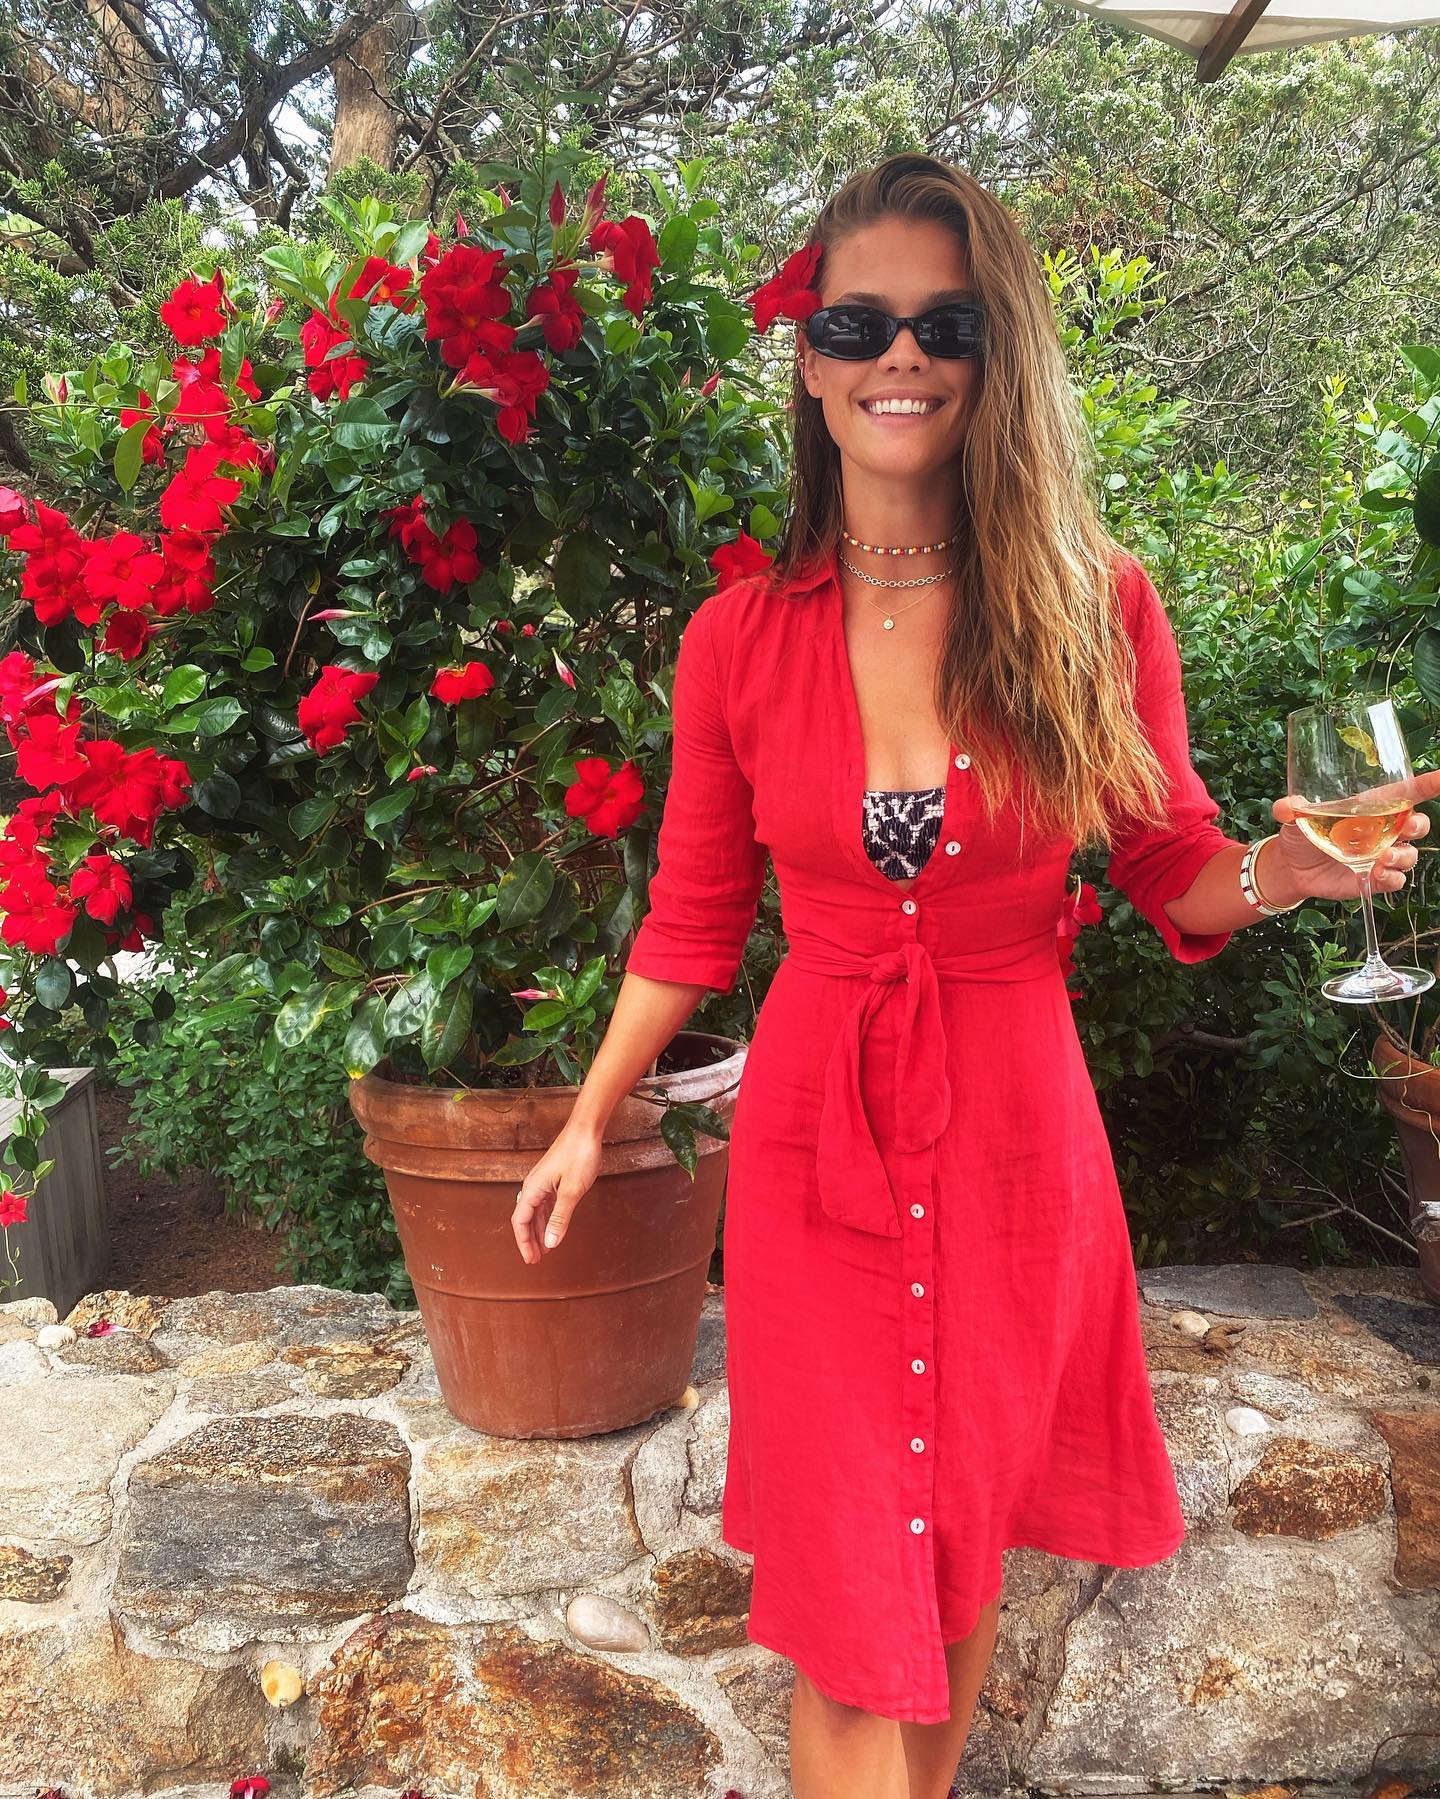 Photos n°1 : Nina Agdal is The Lady in Red!